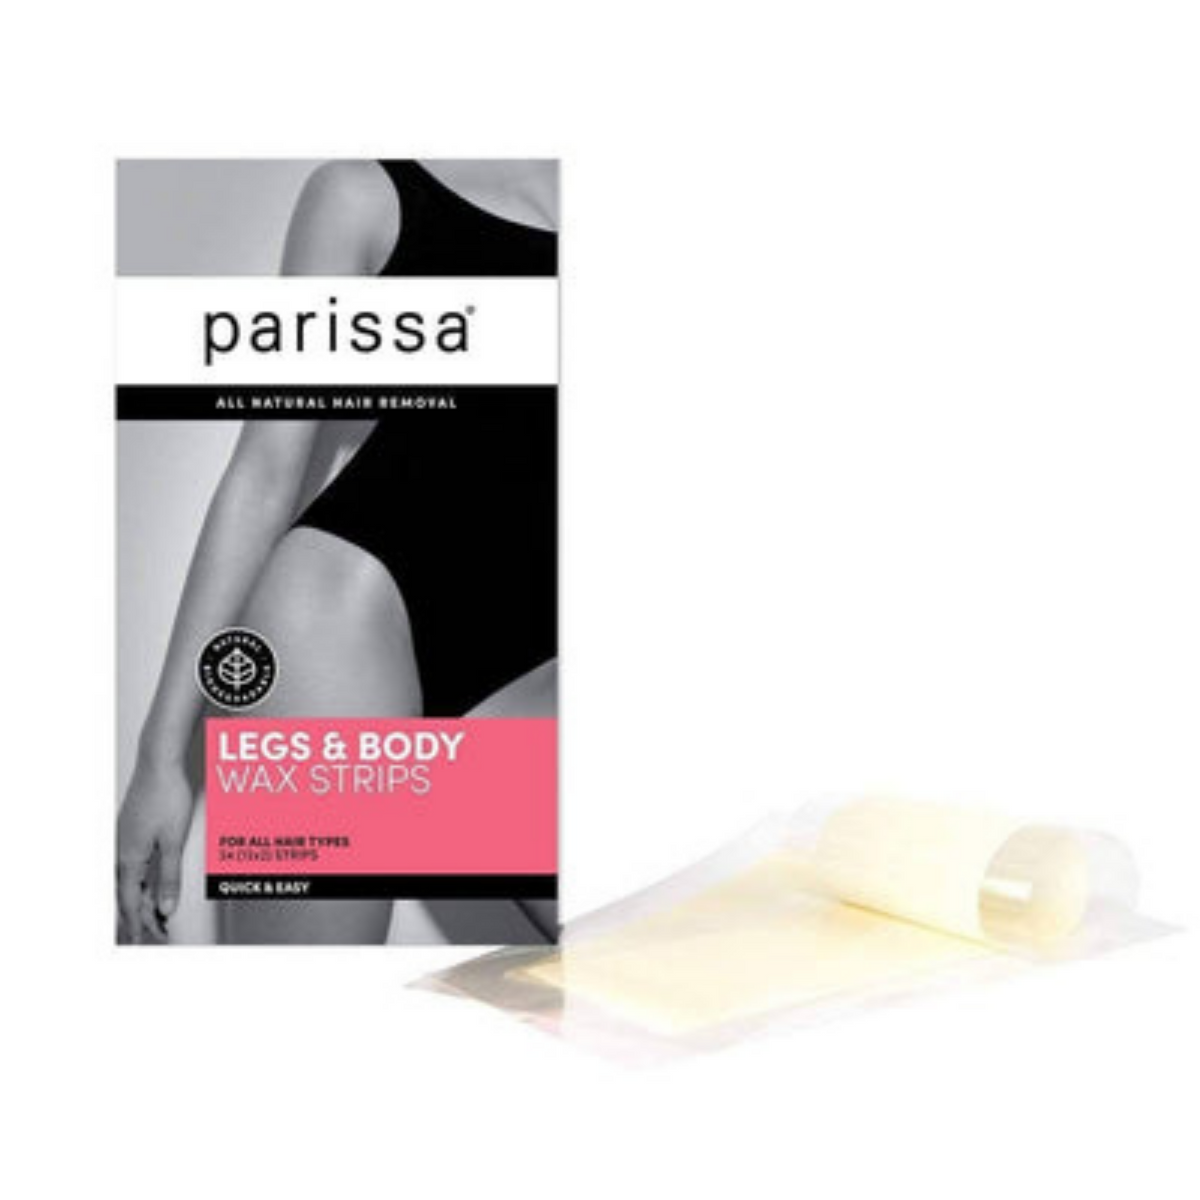 Primary Image of Legs & Body Wax Strips